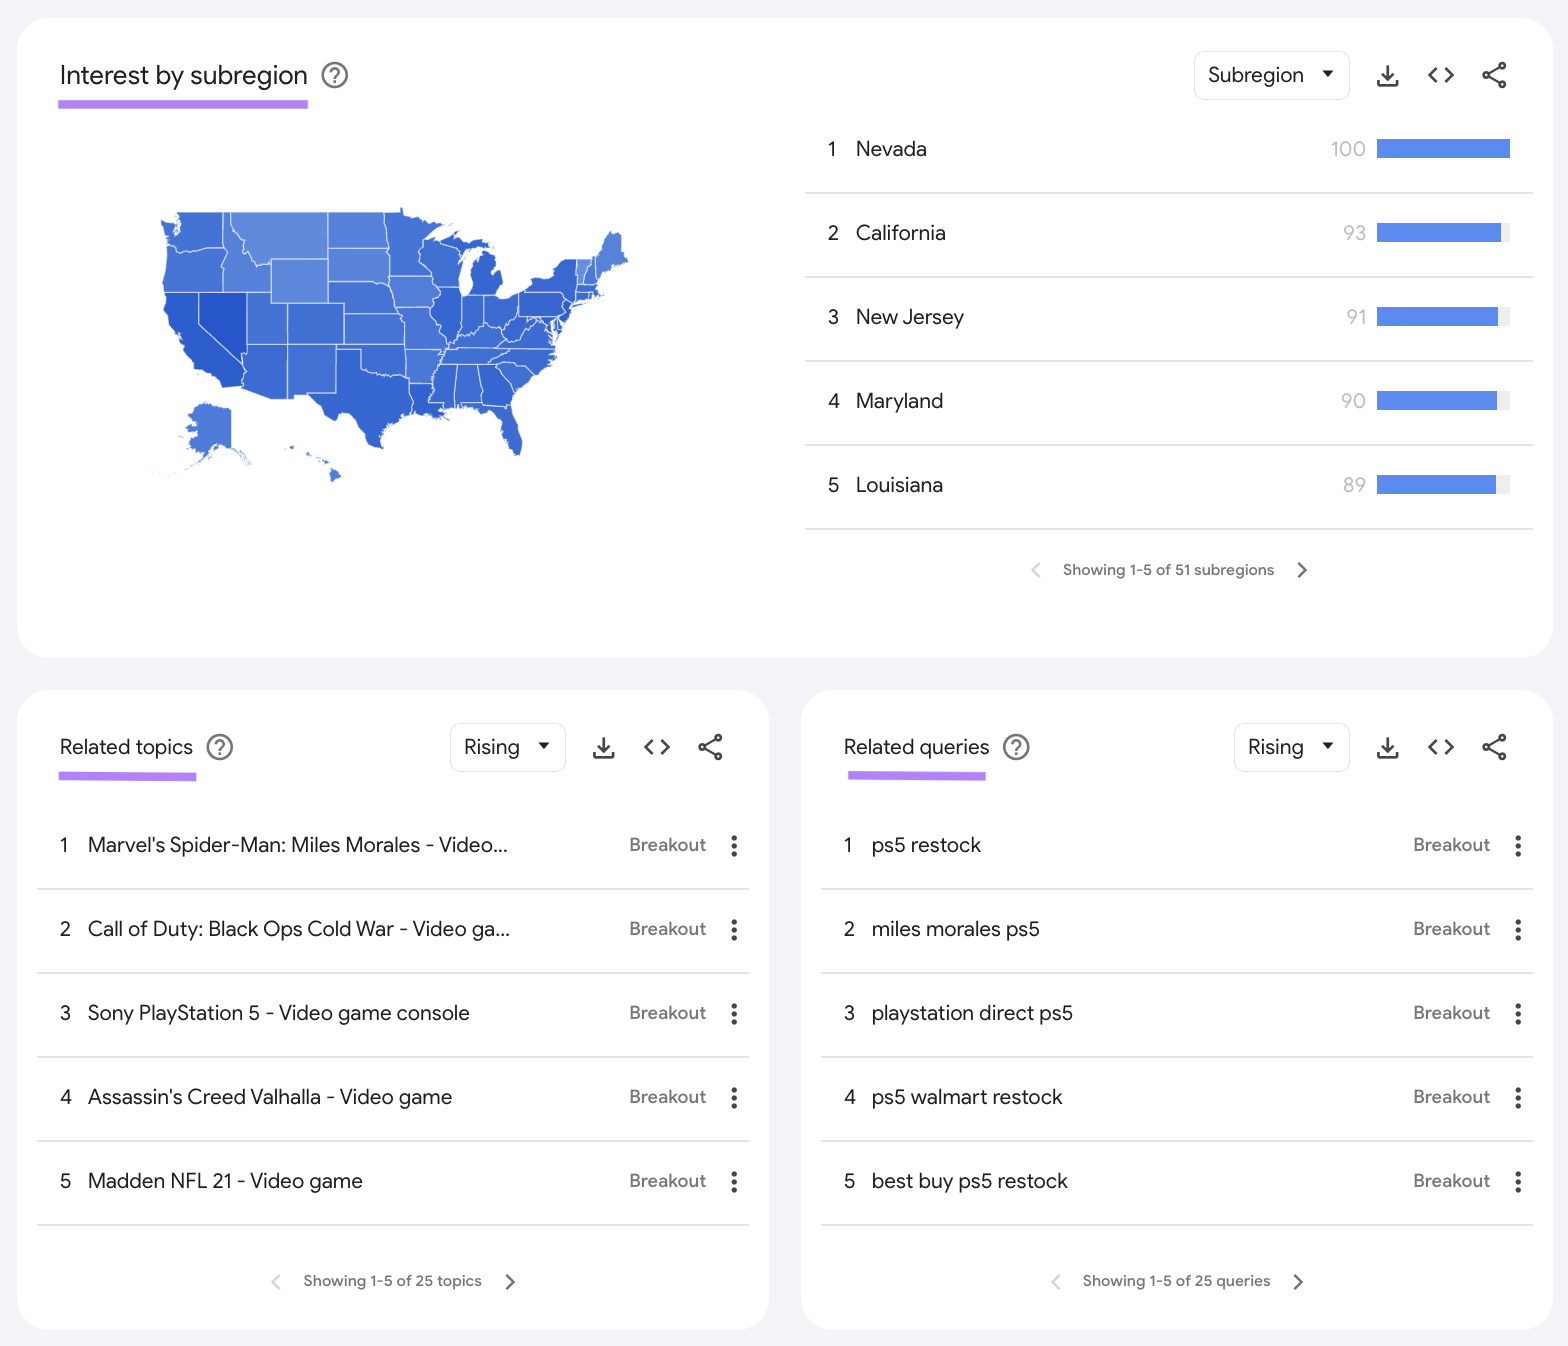 Google Trends dashboard showing "Interest by subregion," "Related topics," and "Related queries" data